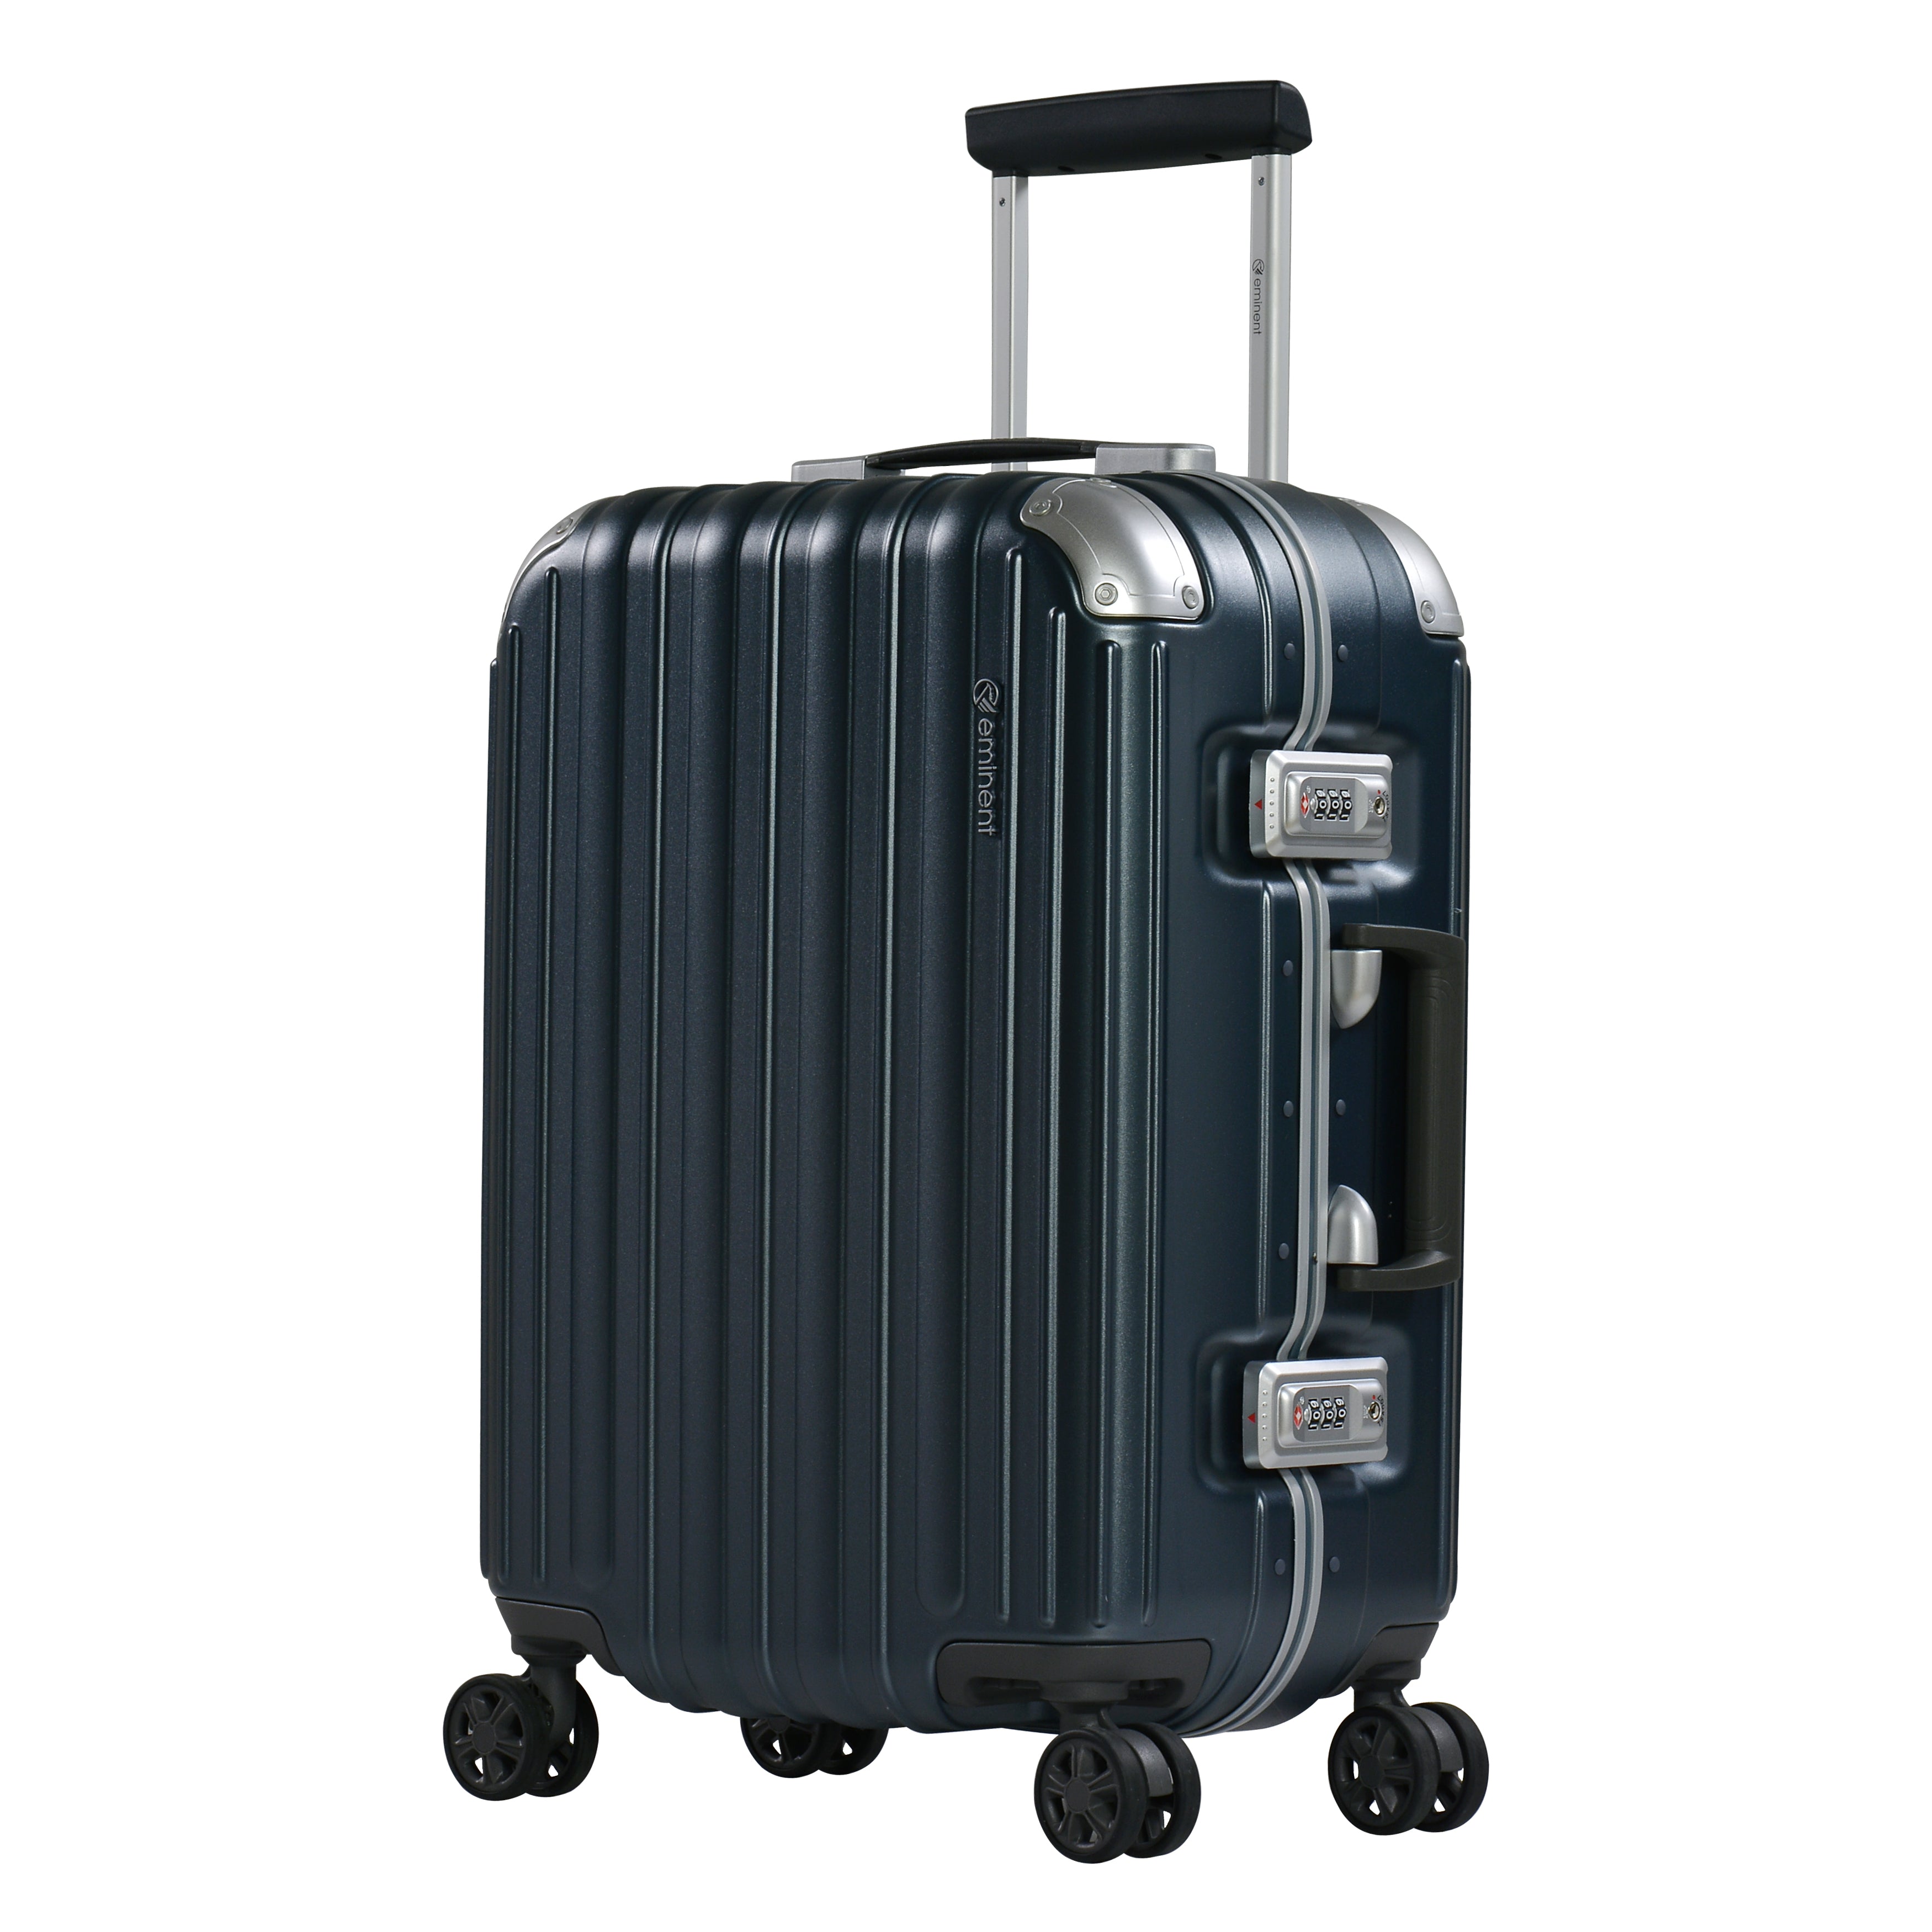 Eminent branded 28" PC Frame checked size  Light Weight Spinner Trolley bag (E9R5-28) - buyluggageonline